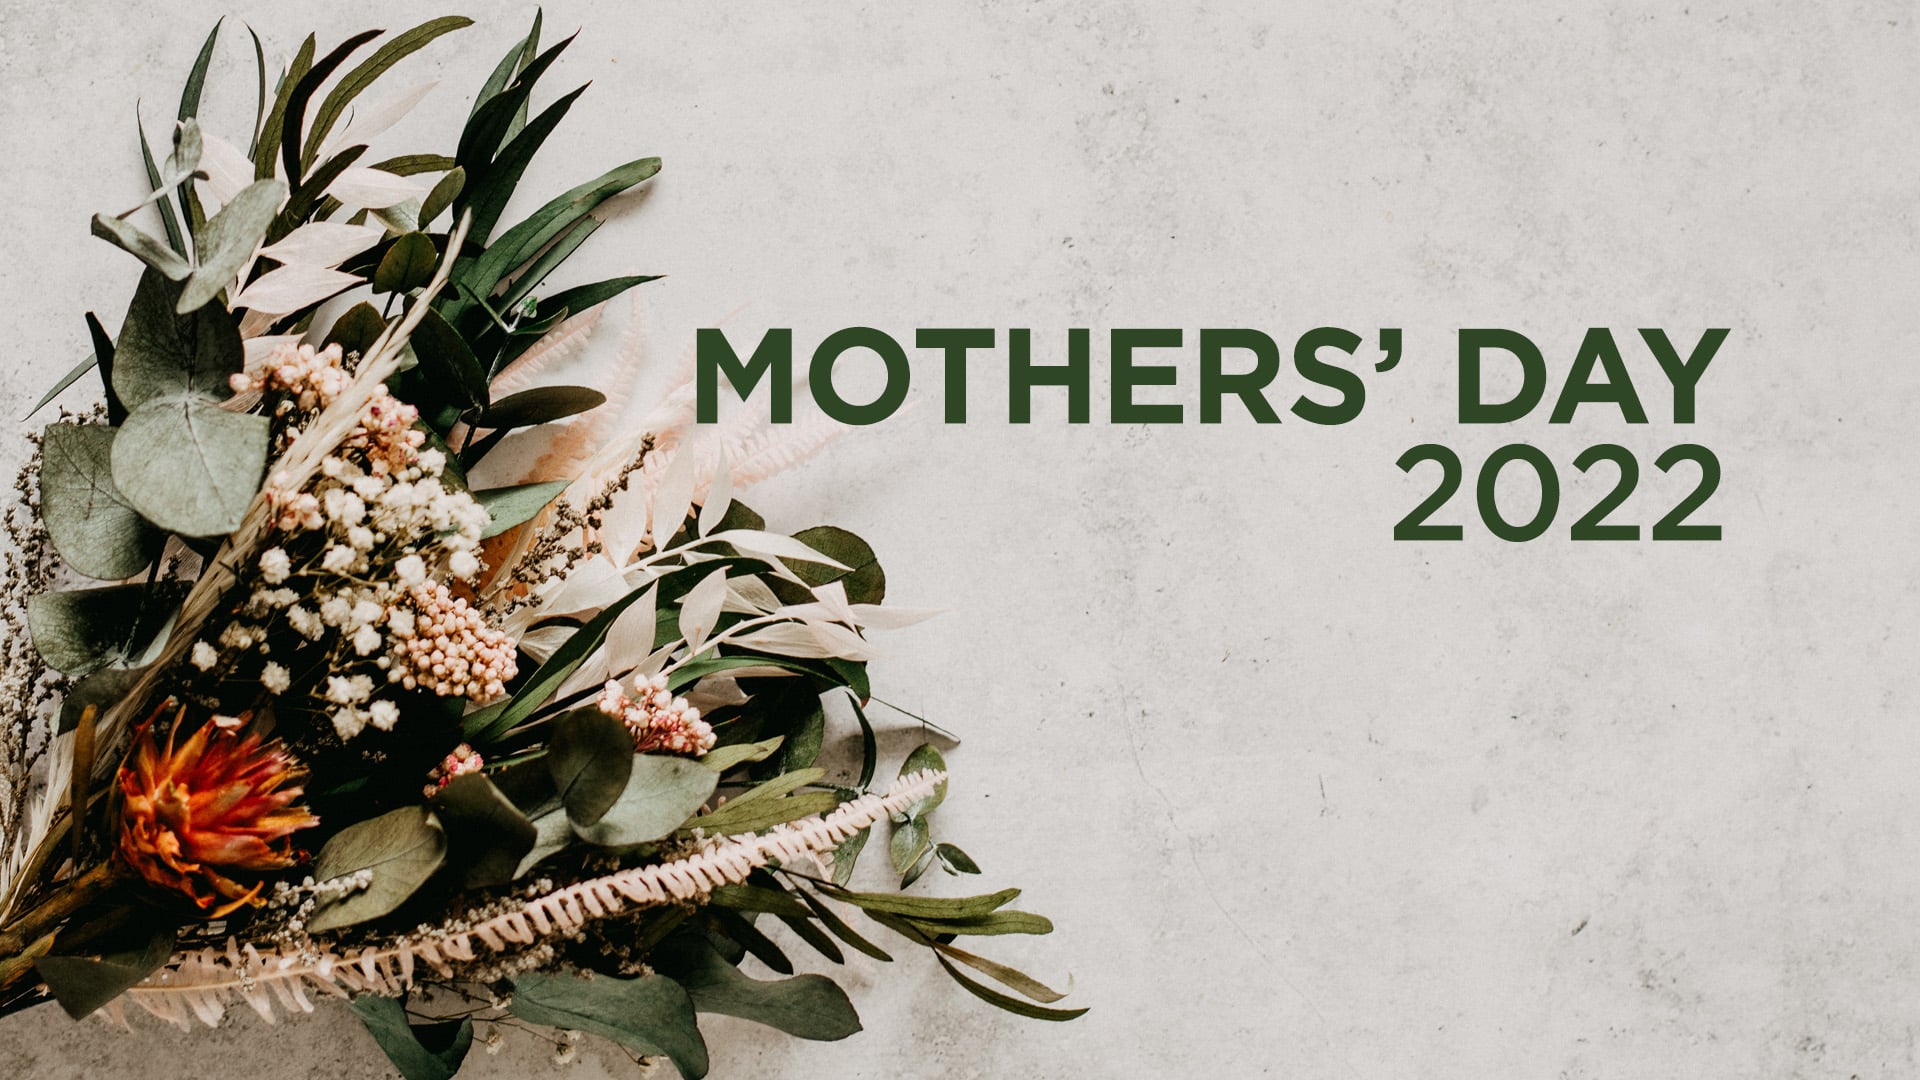 Mothers' Day 2022